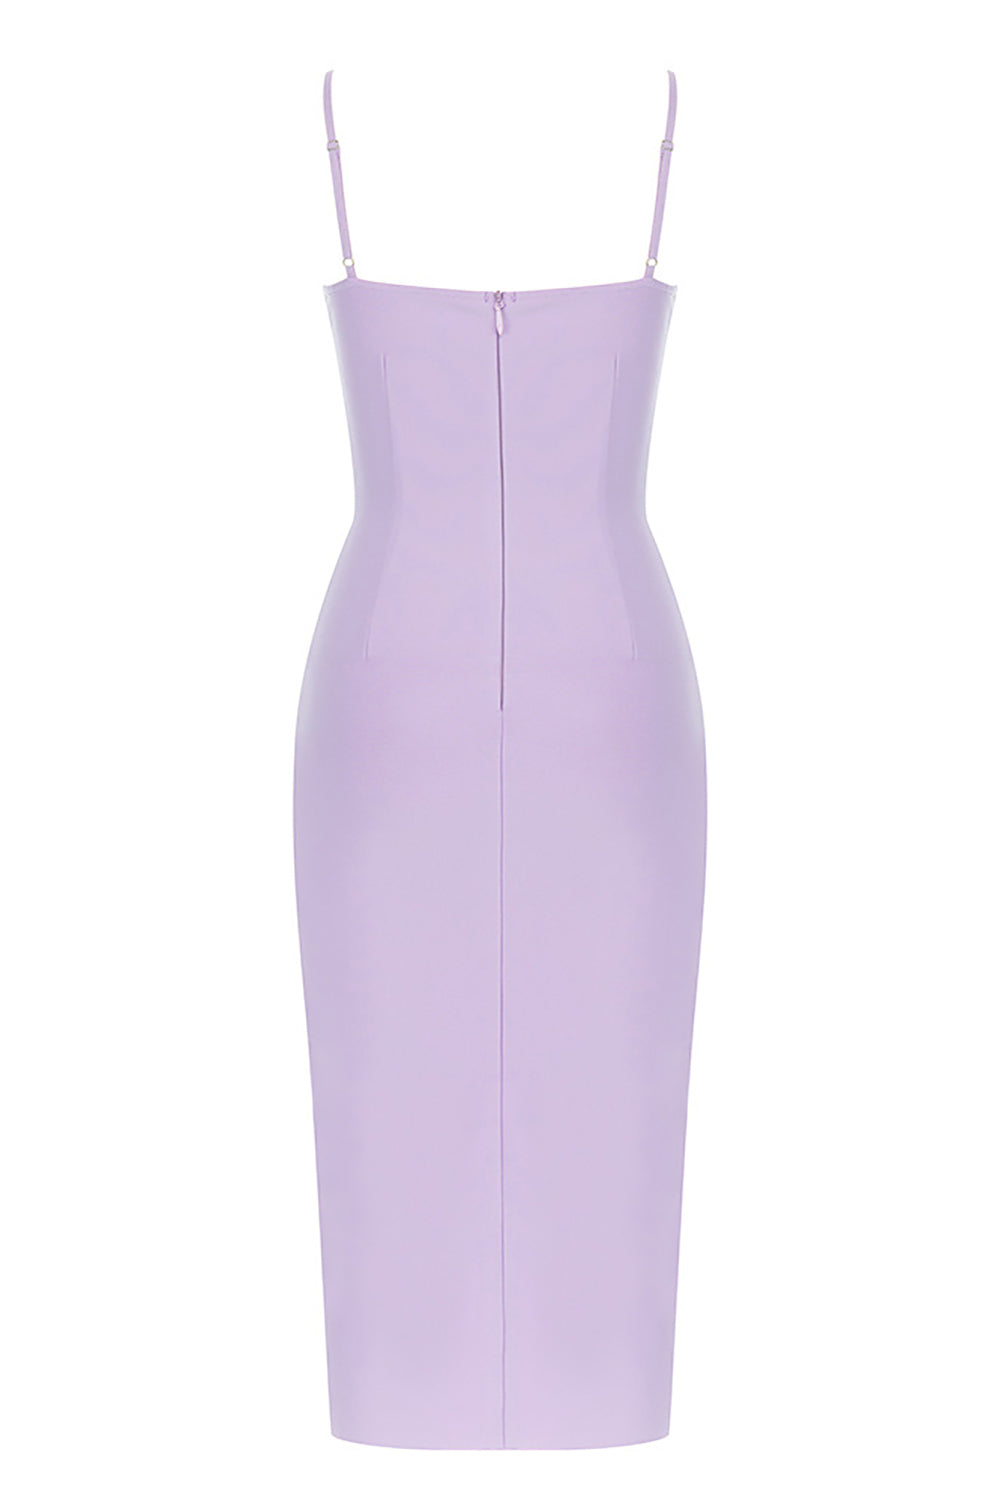 Lilac Bodycon Glitter Cocktail Dress With Split Front